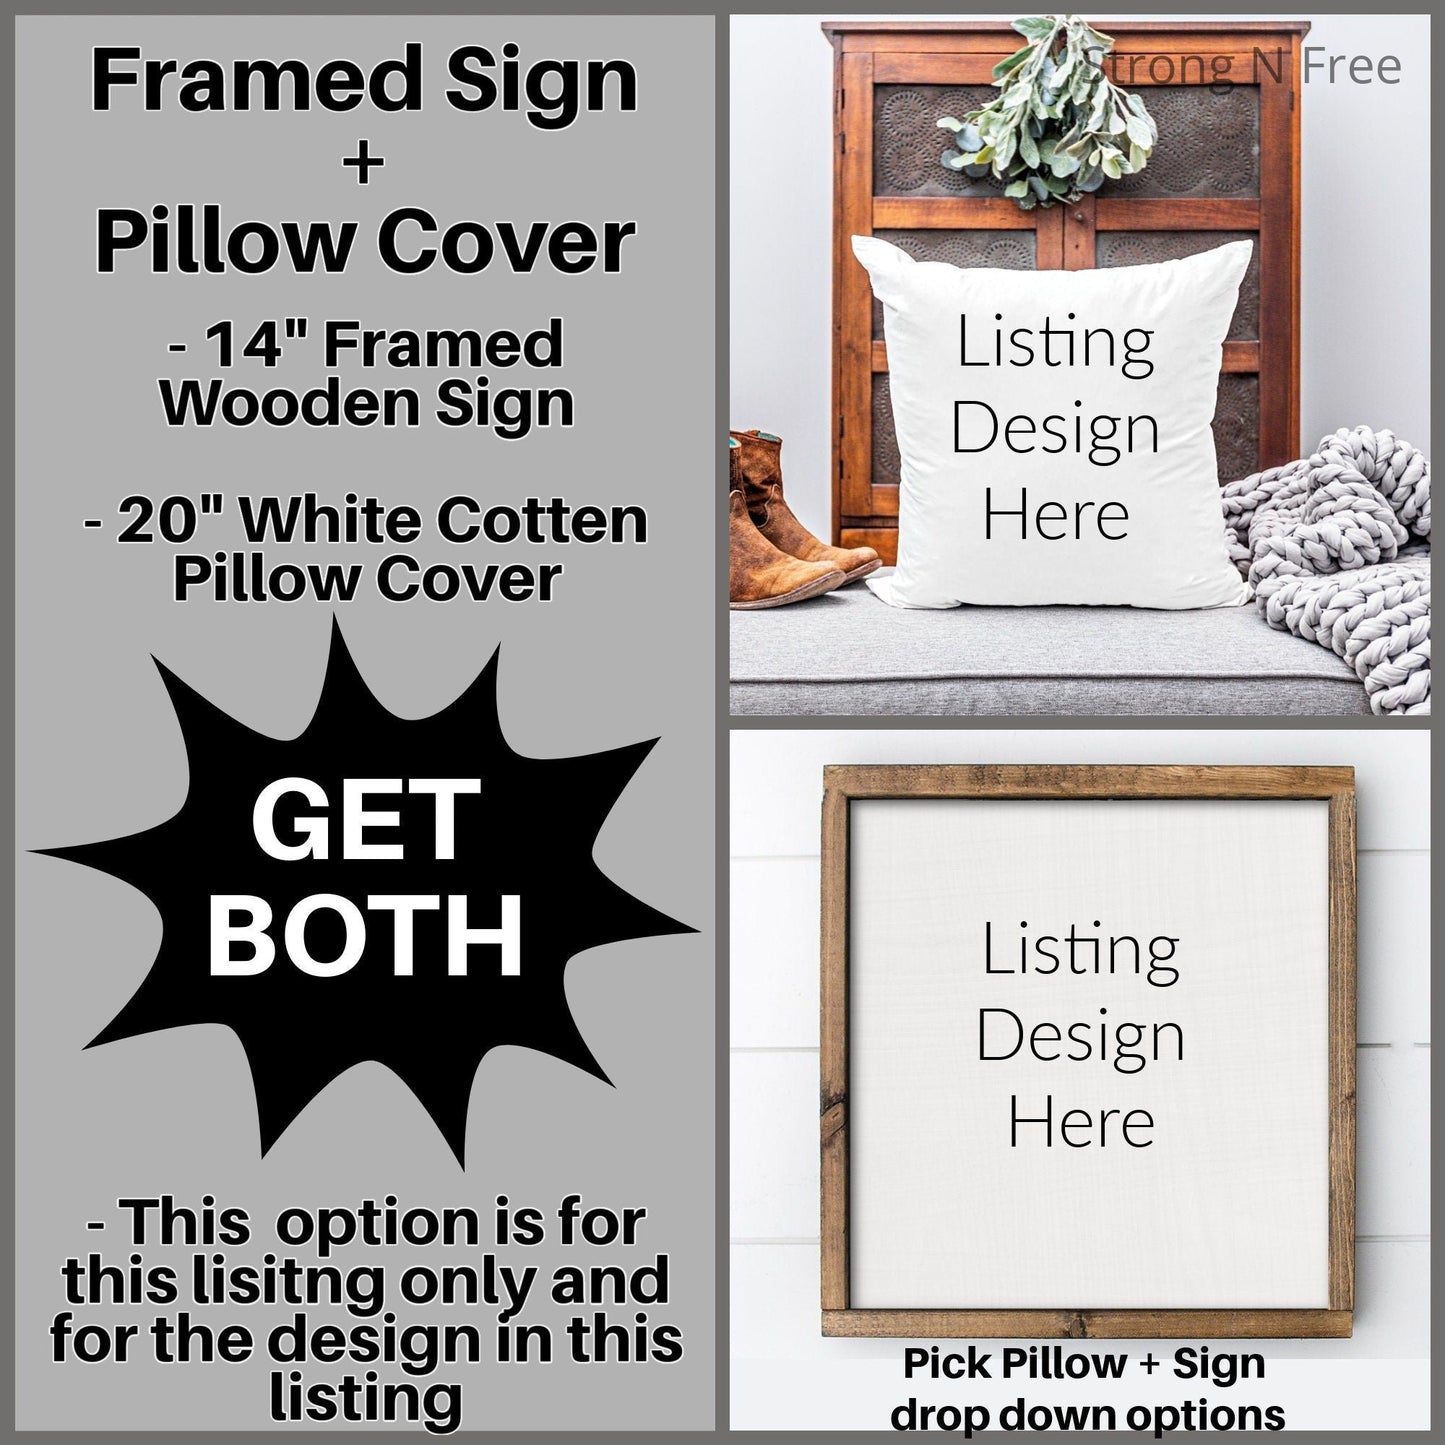 Laundry Room Signs | Laundry Room Decor | Laundry Signs | Wooden Signs | Wooden Framed Signs | The Laundry Is Looking At Me Dirty Again |